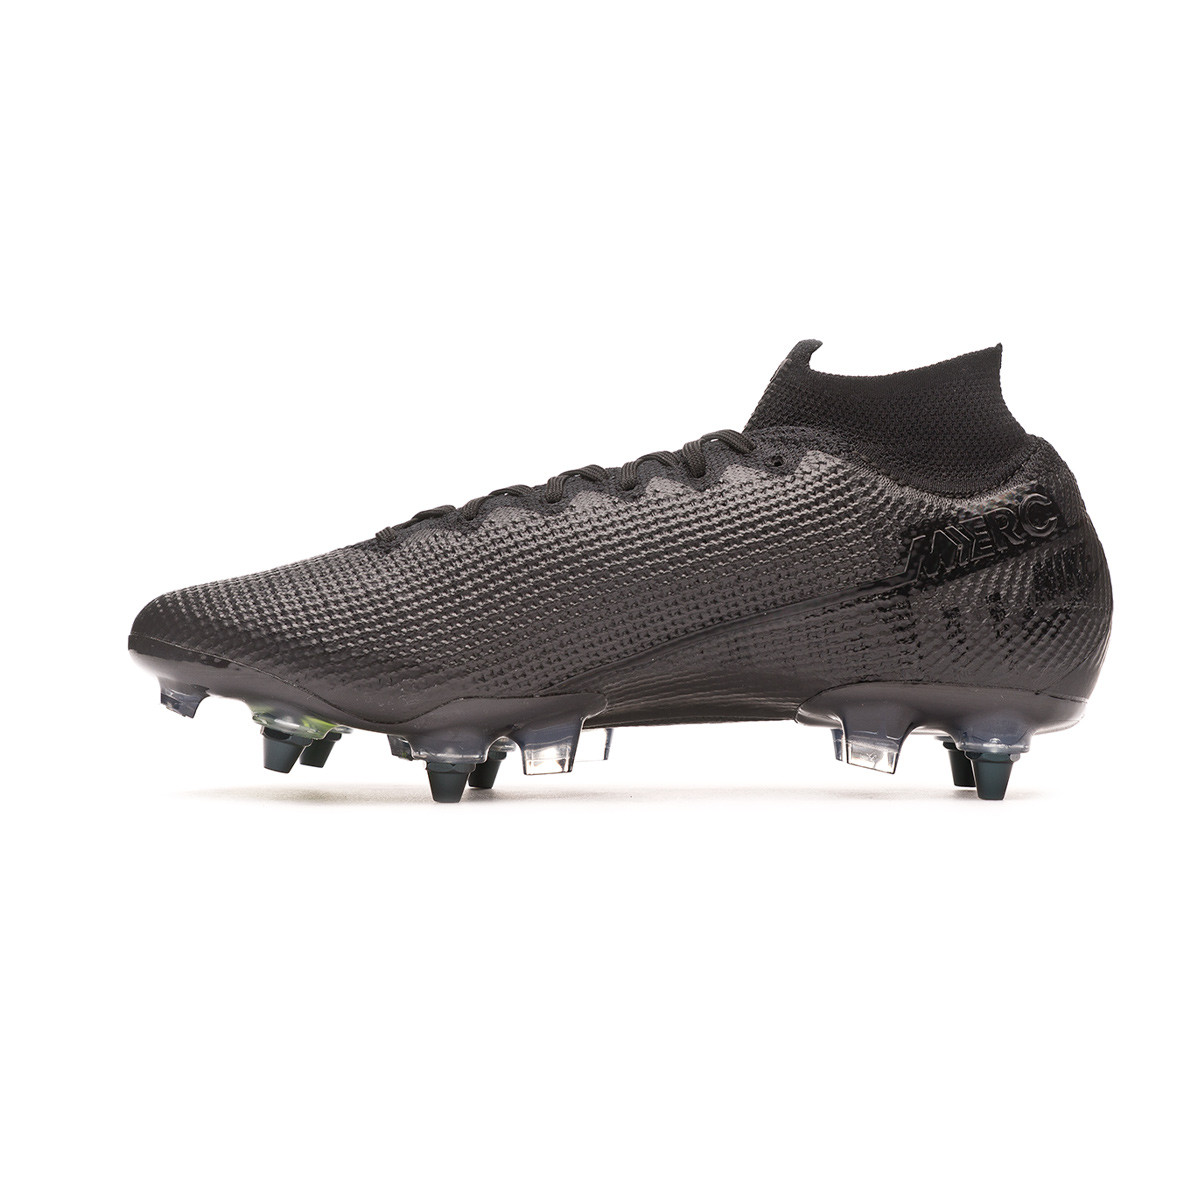 Nike Mercurial Superfly 7 Elite Ag Pro M AT7892 414 shoes.